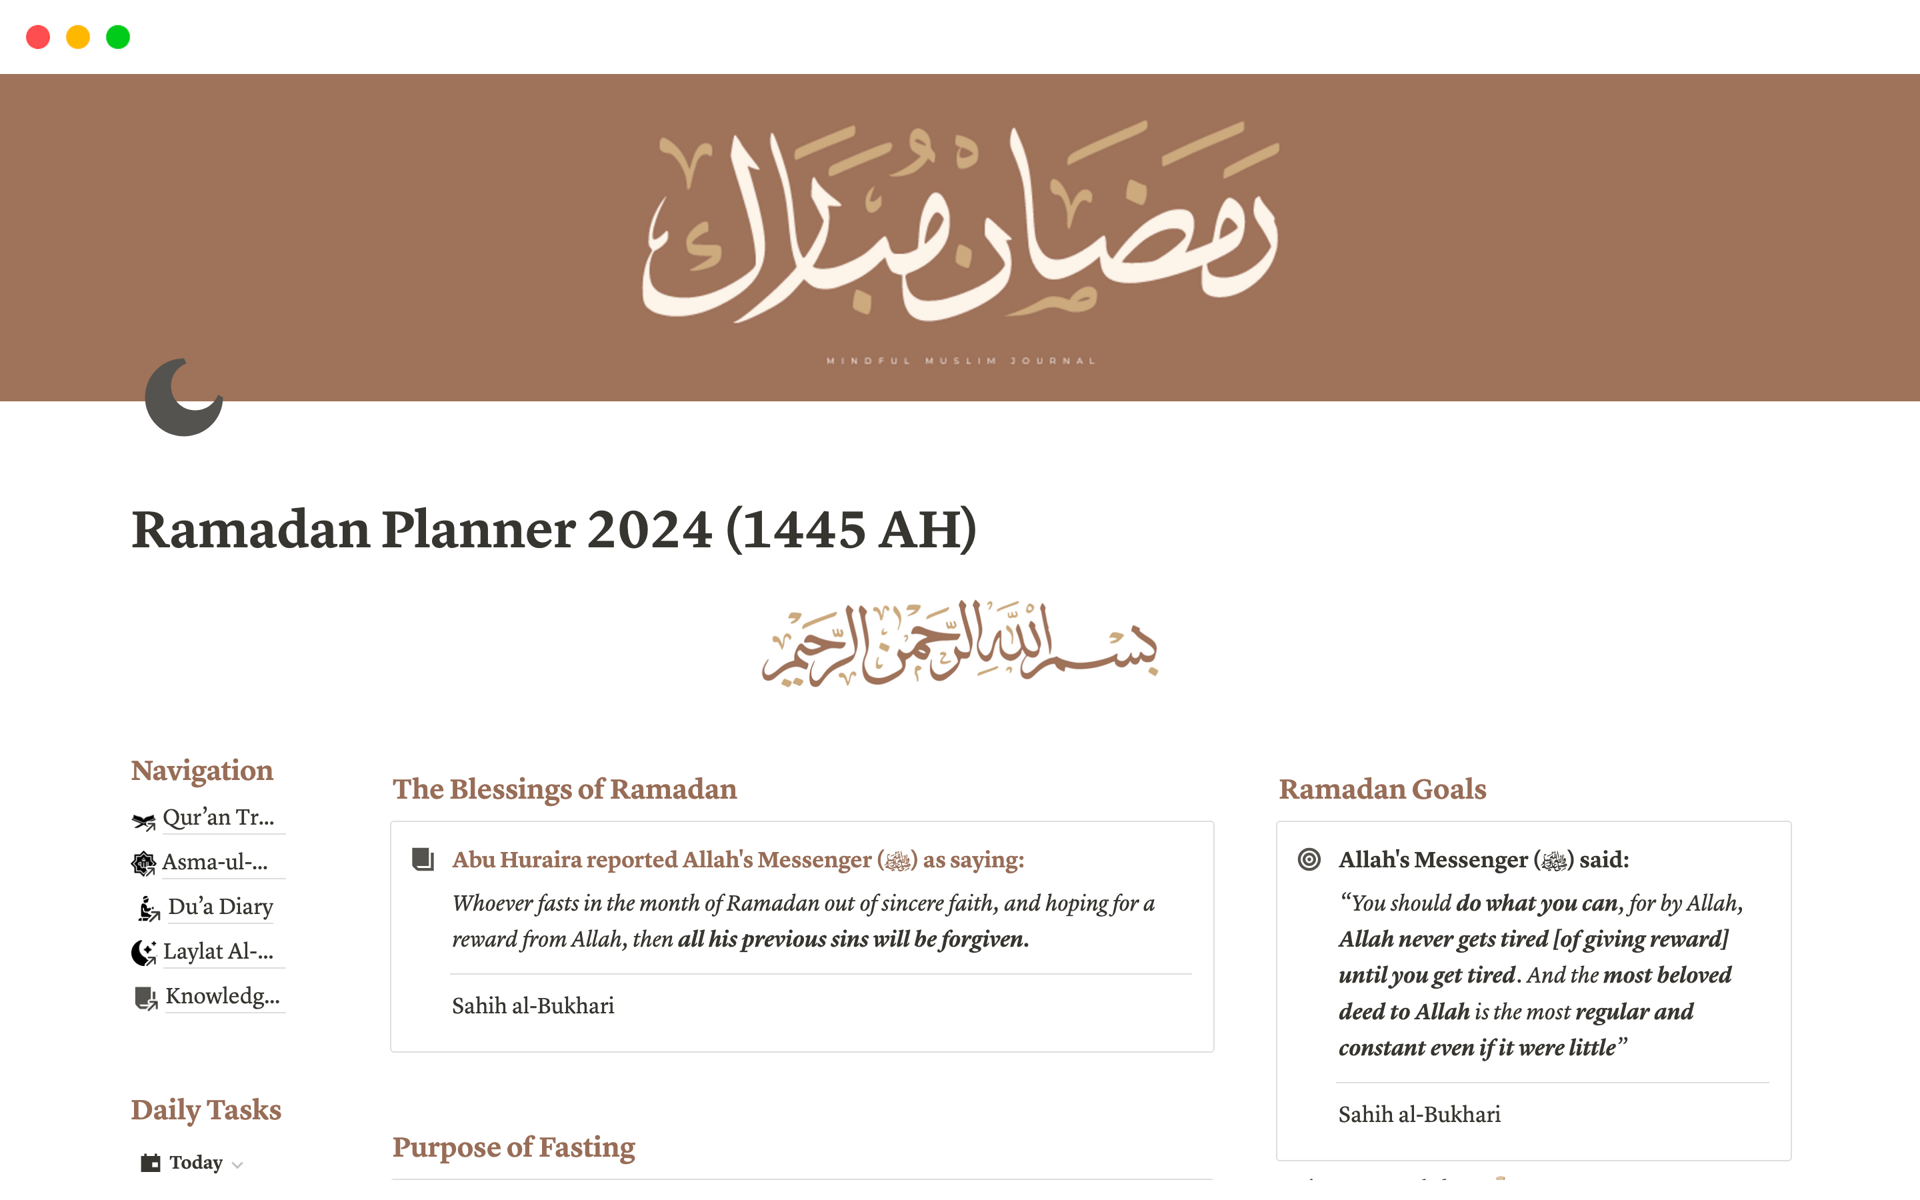 The "Ultimate Ramadan Planner" is a comprehensive and efficient tool for organizing and maximizing productivity during the holy month of Ramadan.